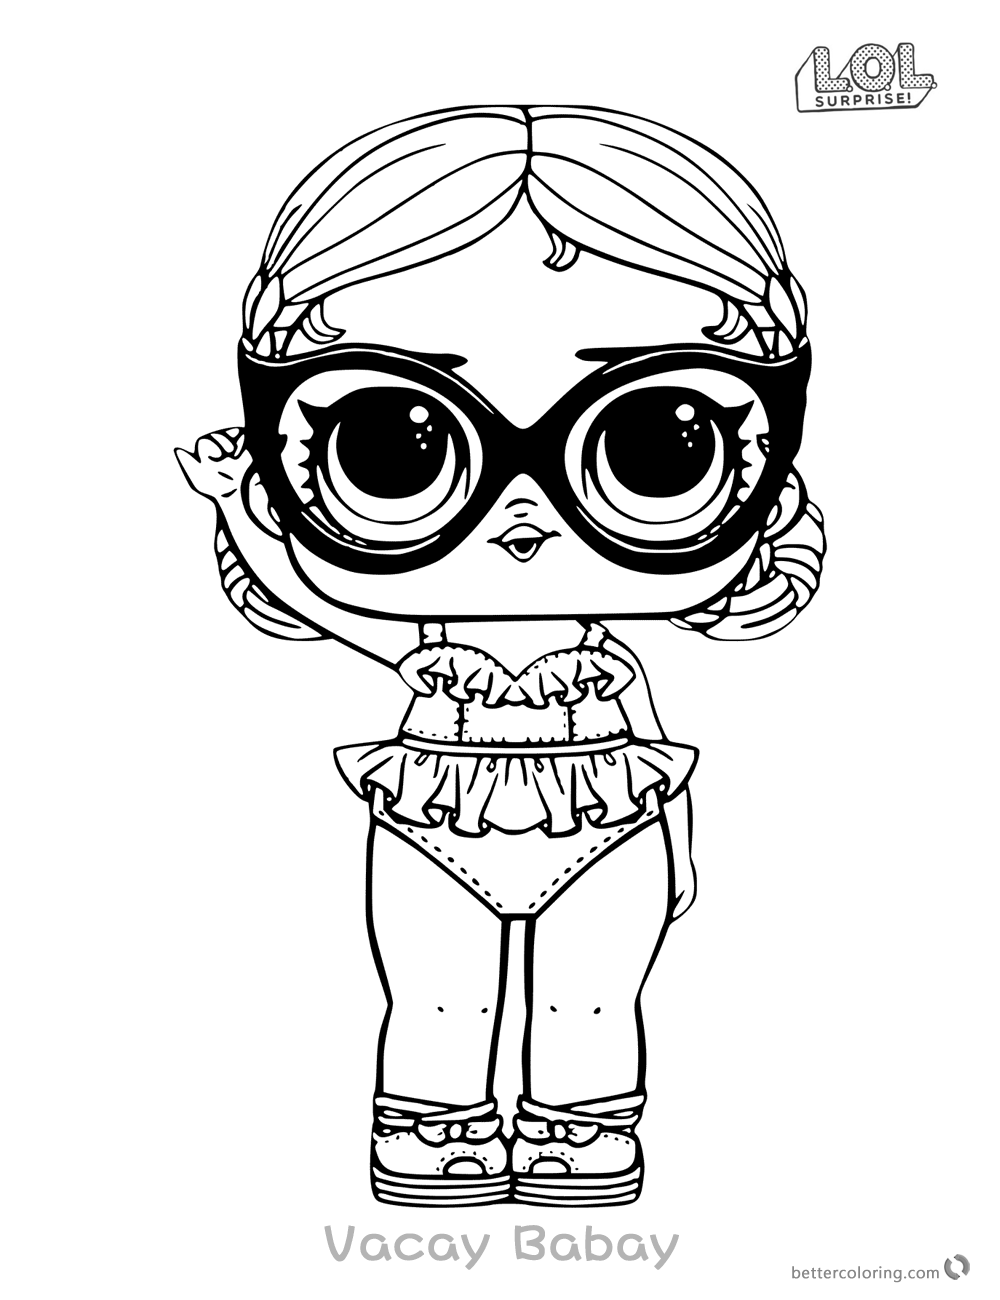 LOL Surprise Doll Coloring Pages Vacay Babay printable